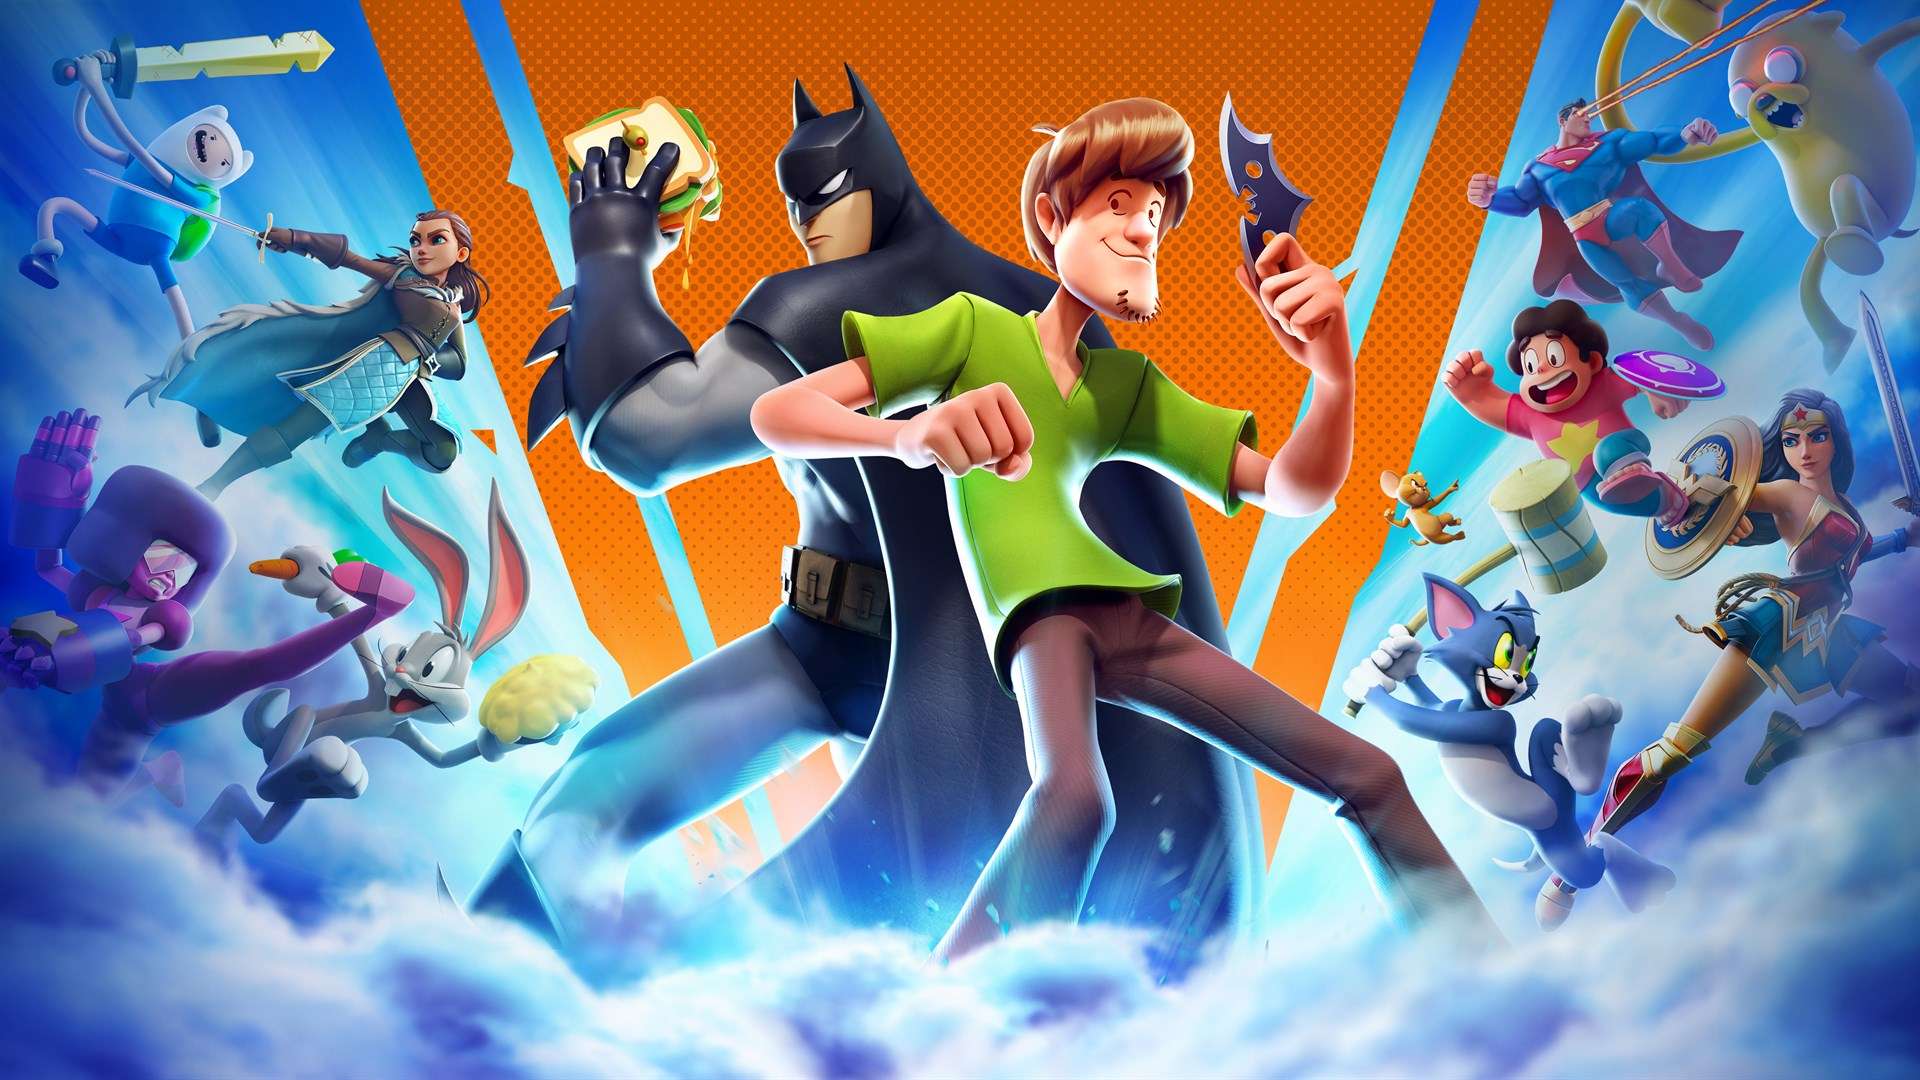 Batman and Shaggy surrounded by various MultiVersus characters.